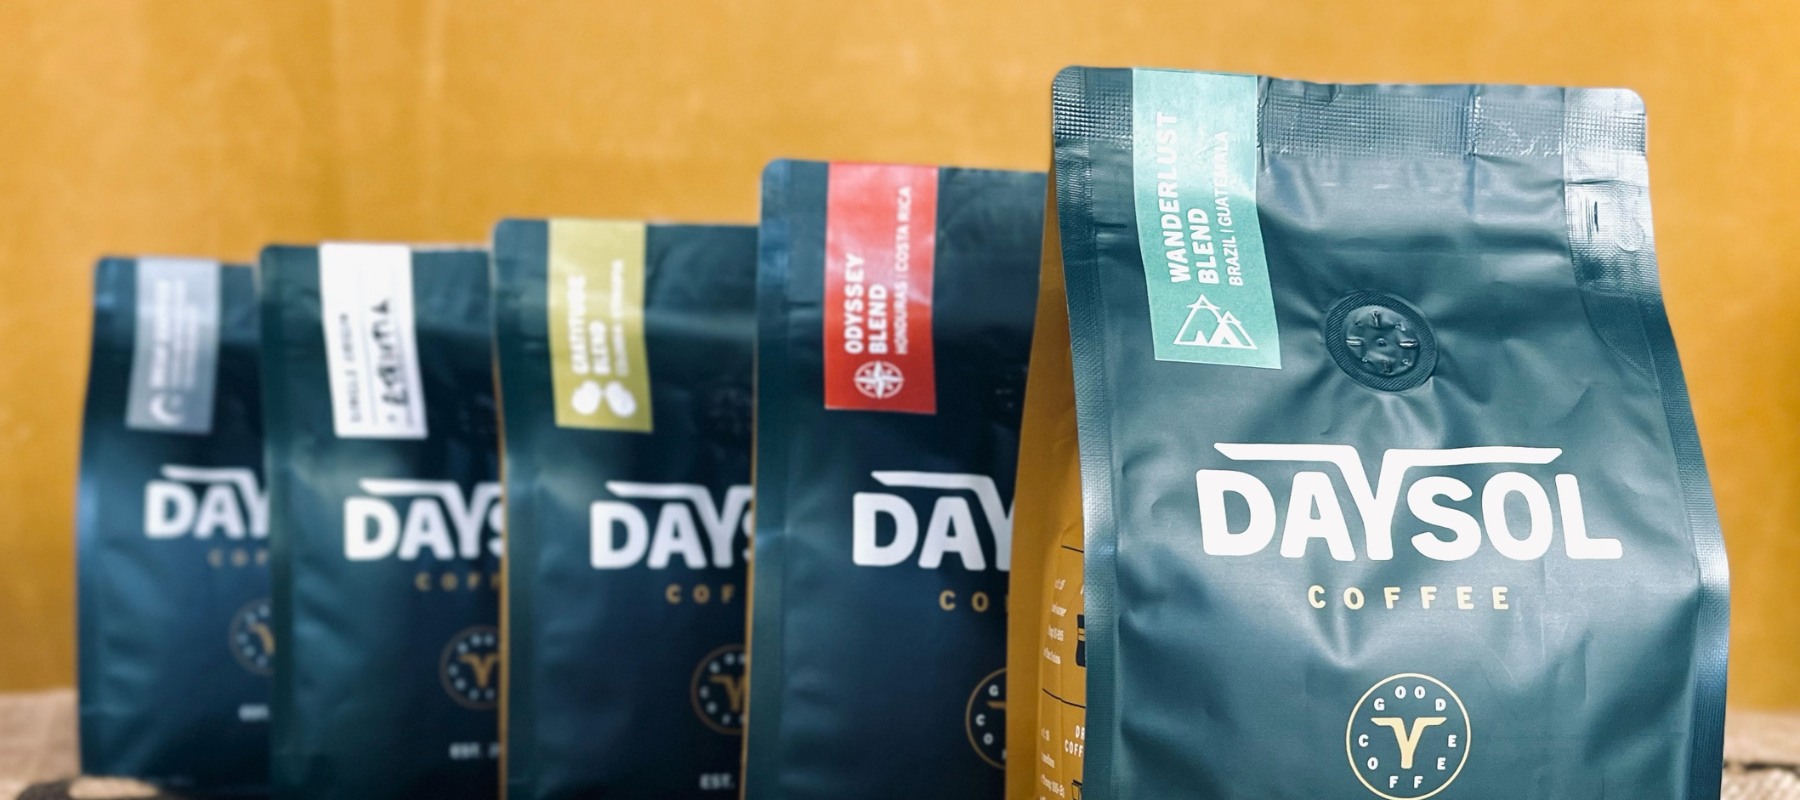 A line up of DaySol coffee beans